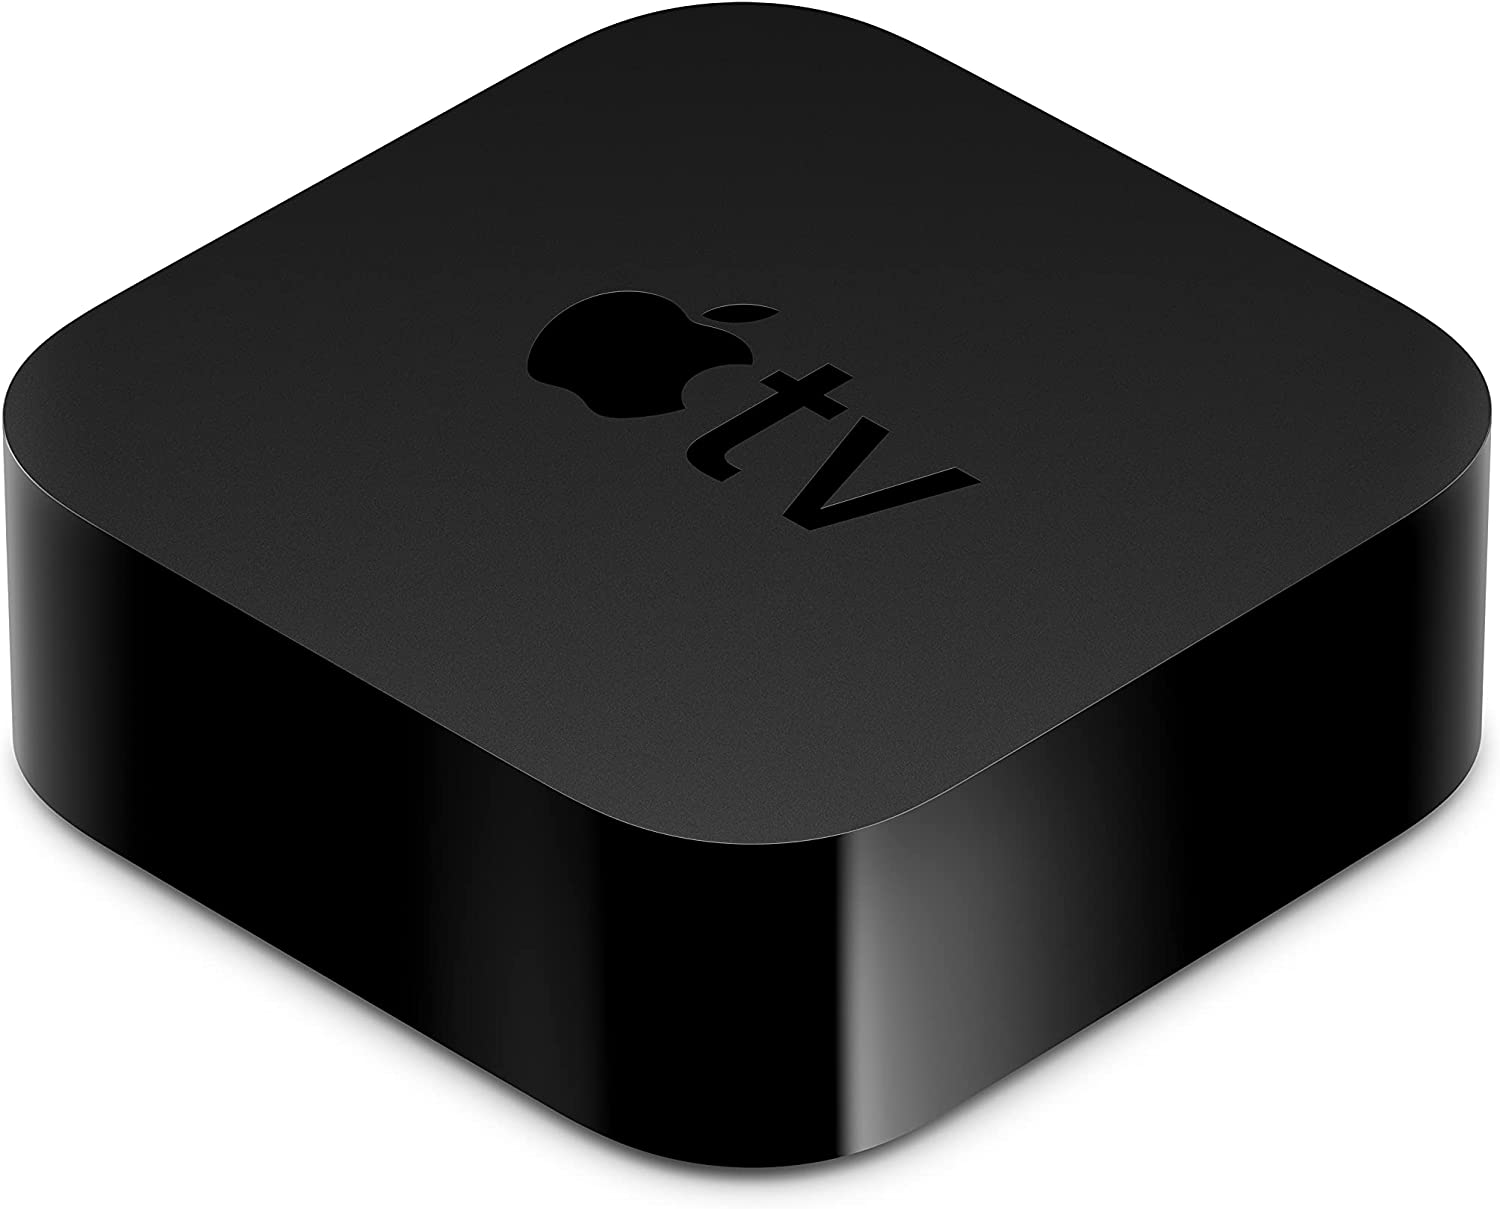 Apple TV HD 32GB Streamer (MHY93LL/A, 2021) Bundle with Wall Mount + Cables